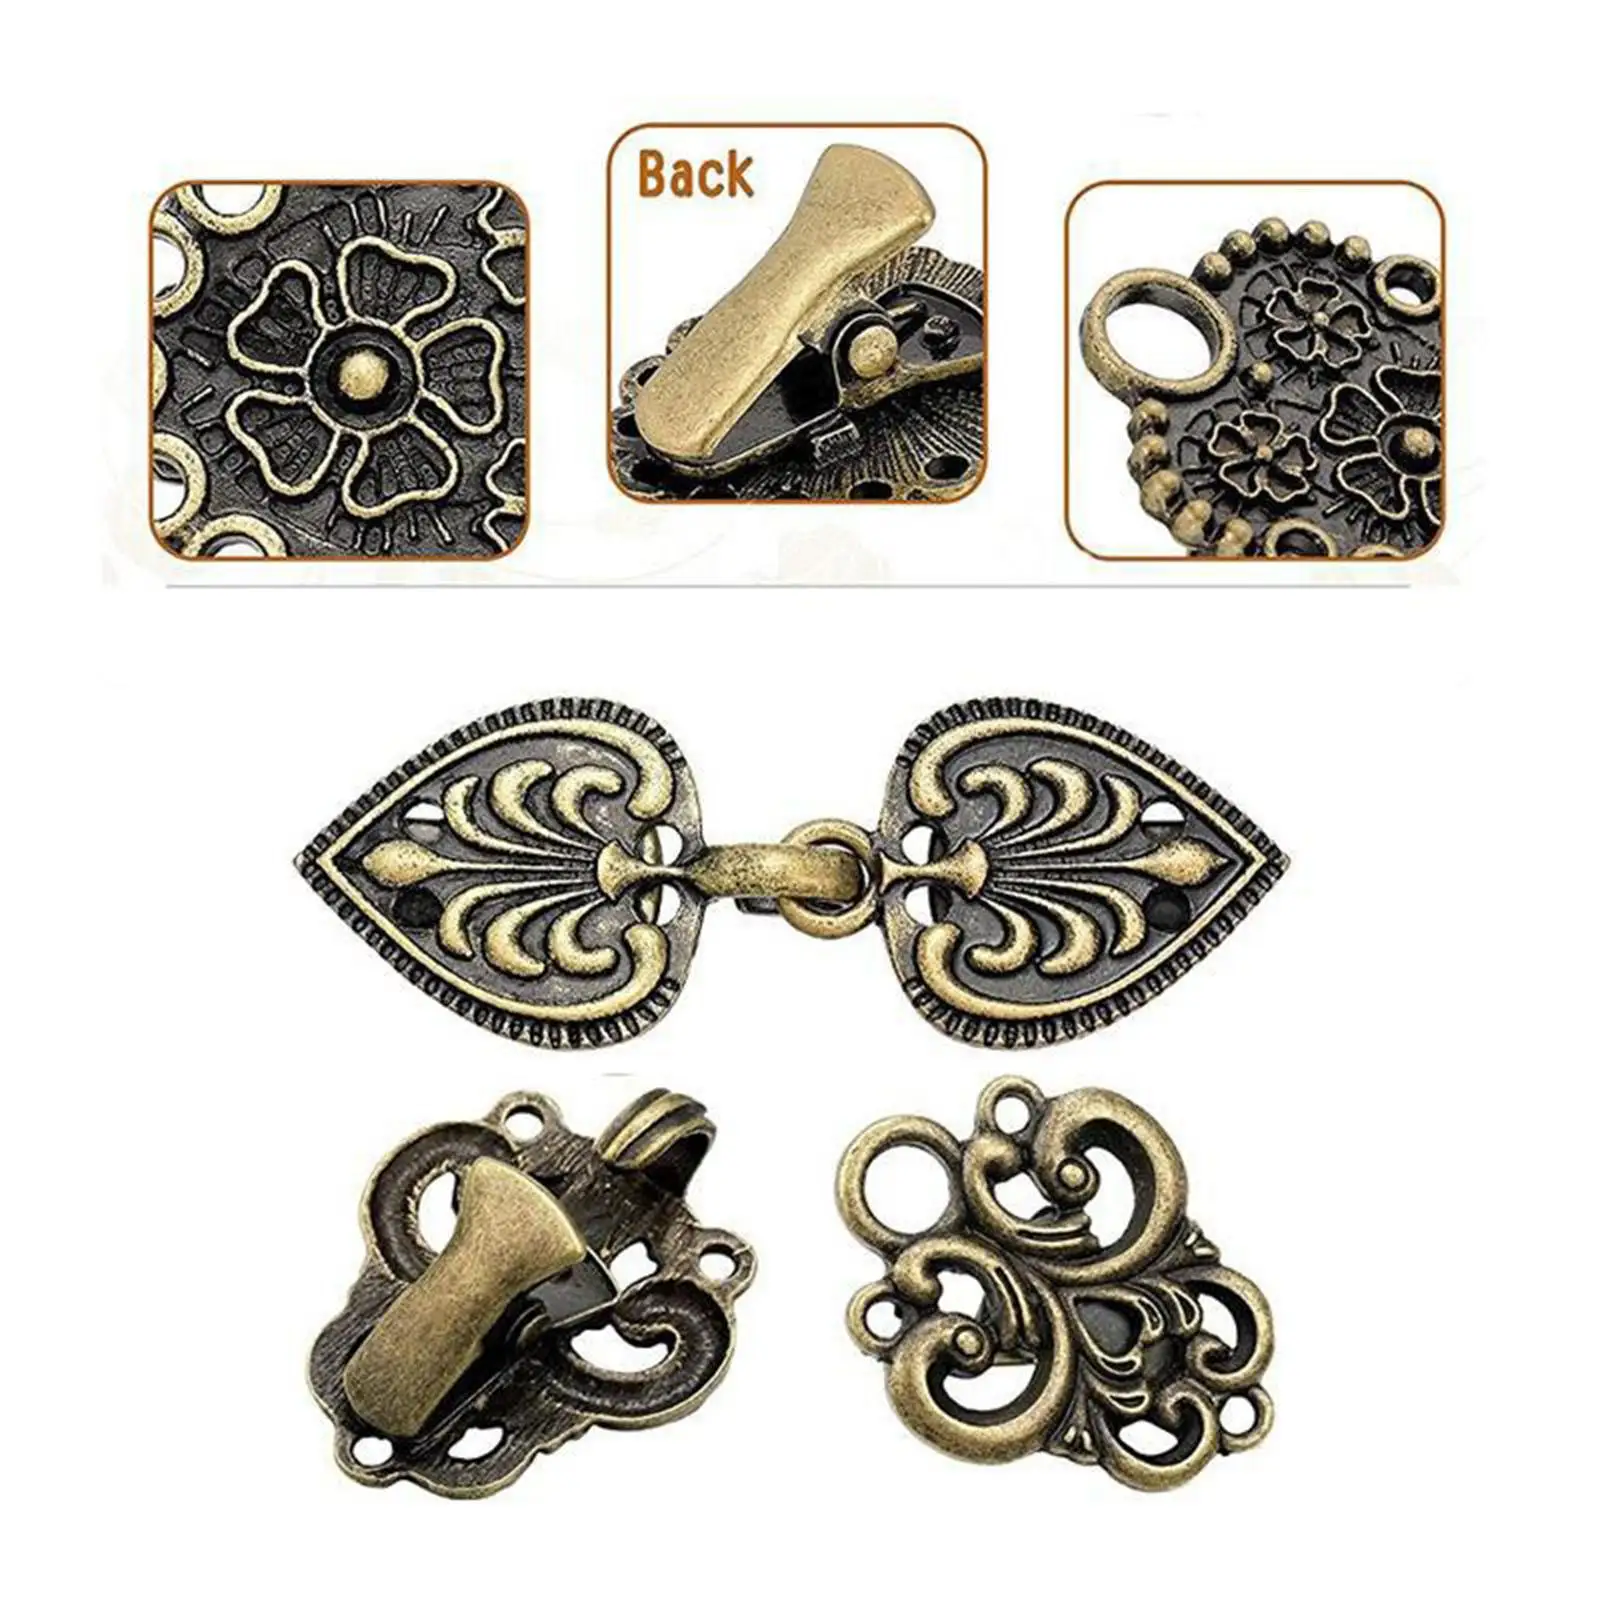 4Pcs Sweater Shawl Duck Mouth Clips Sweater Medieval Alloy Easy to Use Clips Fasteners for Shawl Dresses Jackets Shirt Women